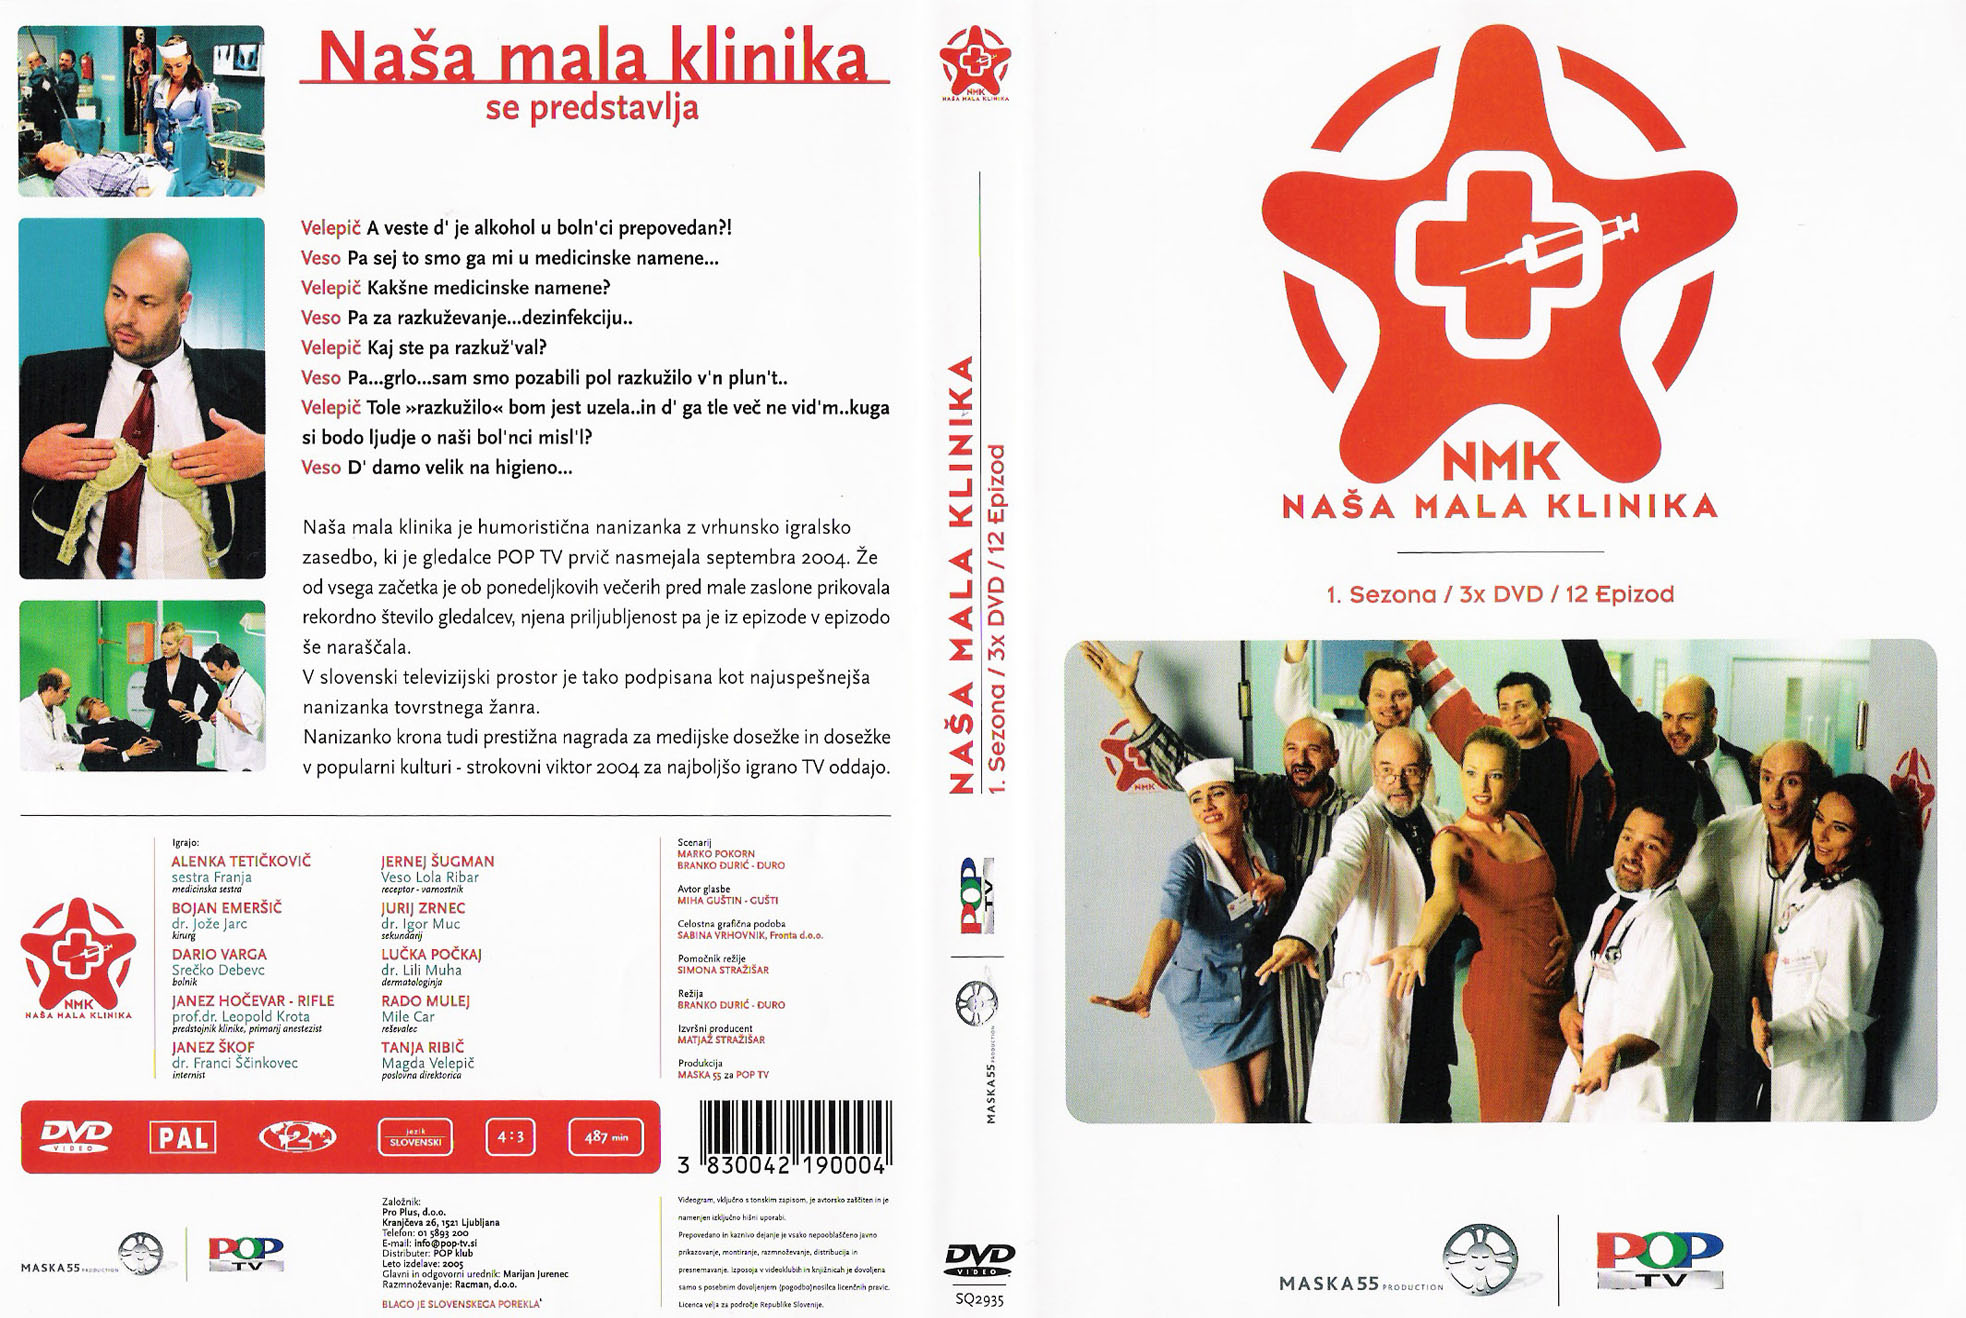 Click to view full size image -  DVD Cover - N - nasa_mala_klinika_slo_dvd - nasa_mala_klinika_slo_dvd.jpg